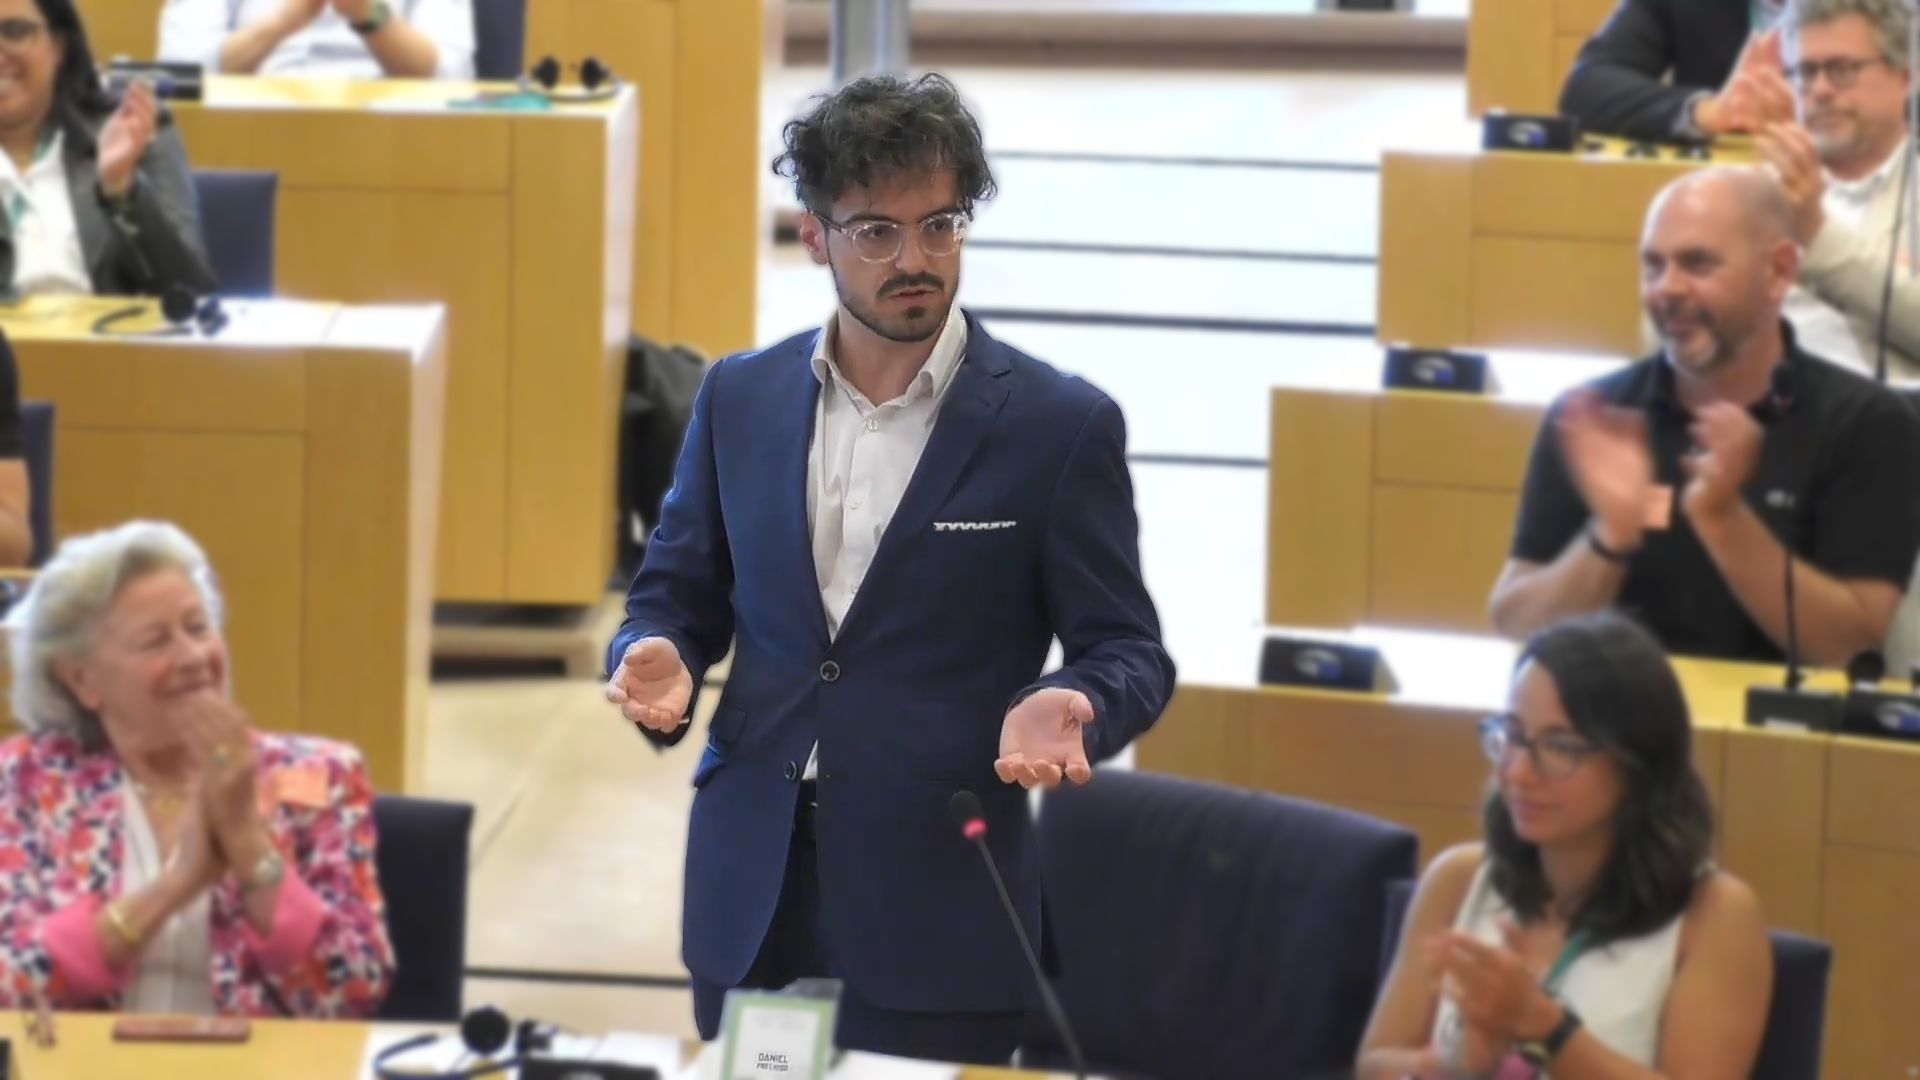 Making Waves in Brussels: How I Took the Stage at the European Parliament 